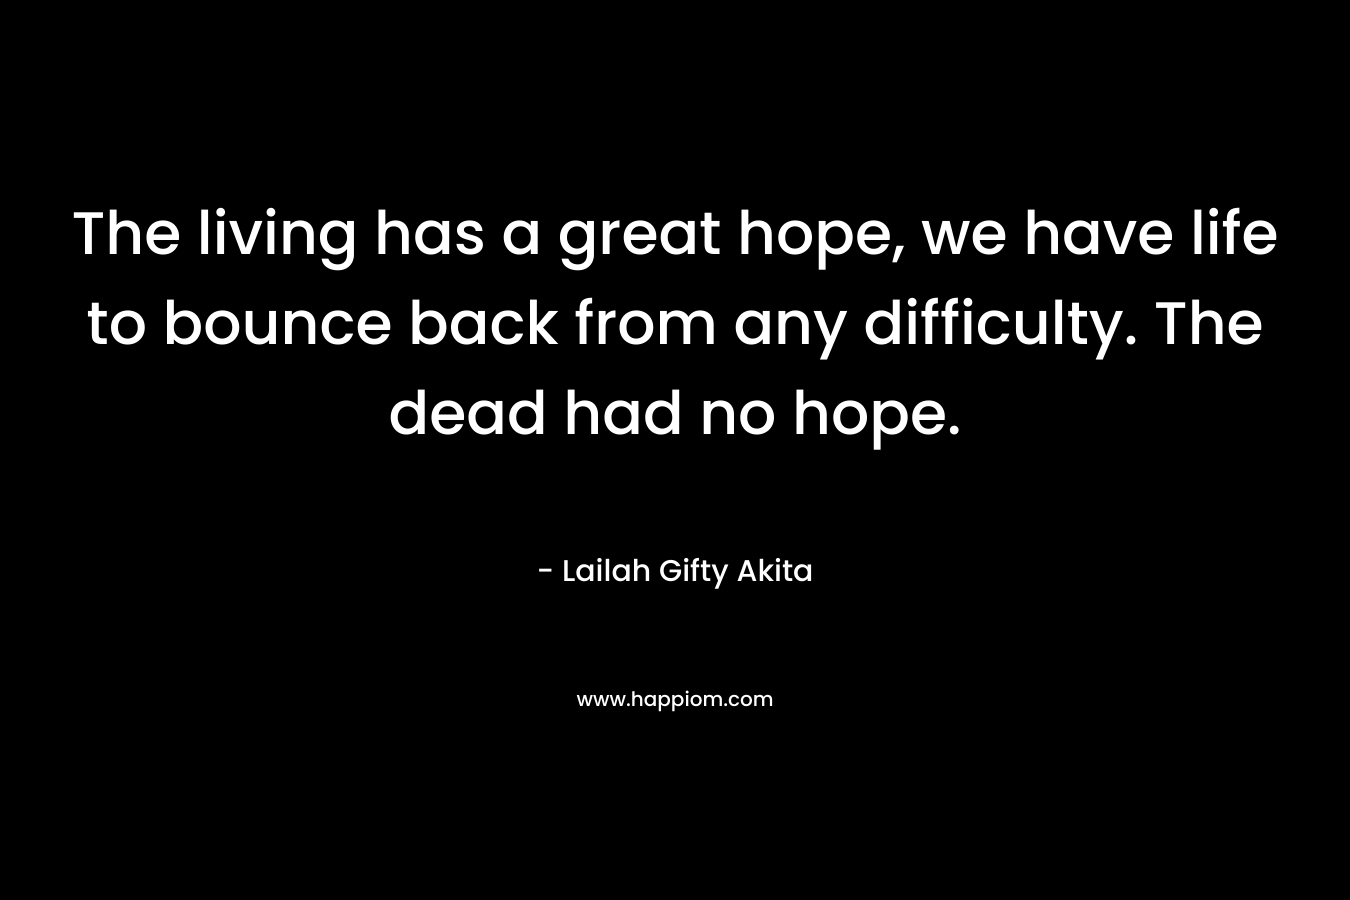 The living has a great hope, we have life to bounce back from any difficulty. The dead had no hope. – Lailah Gifty Akita